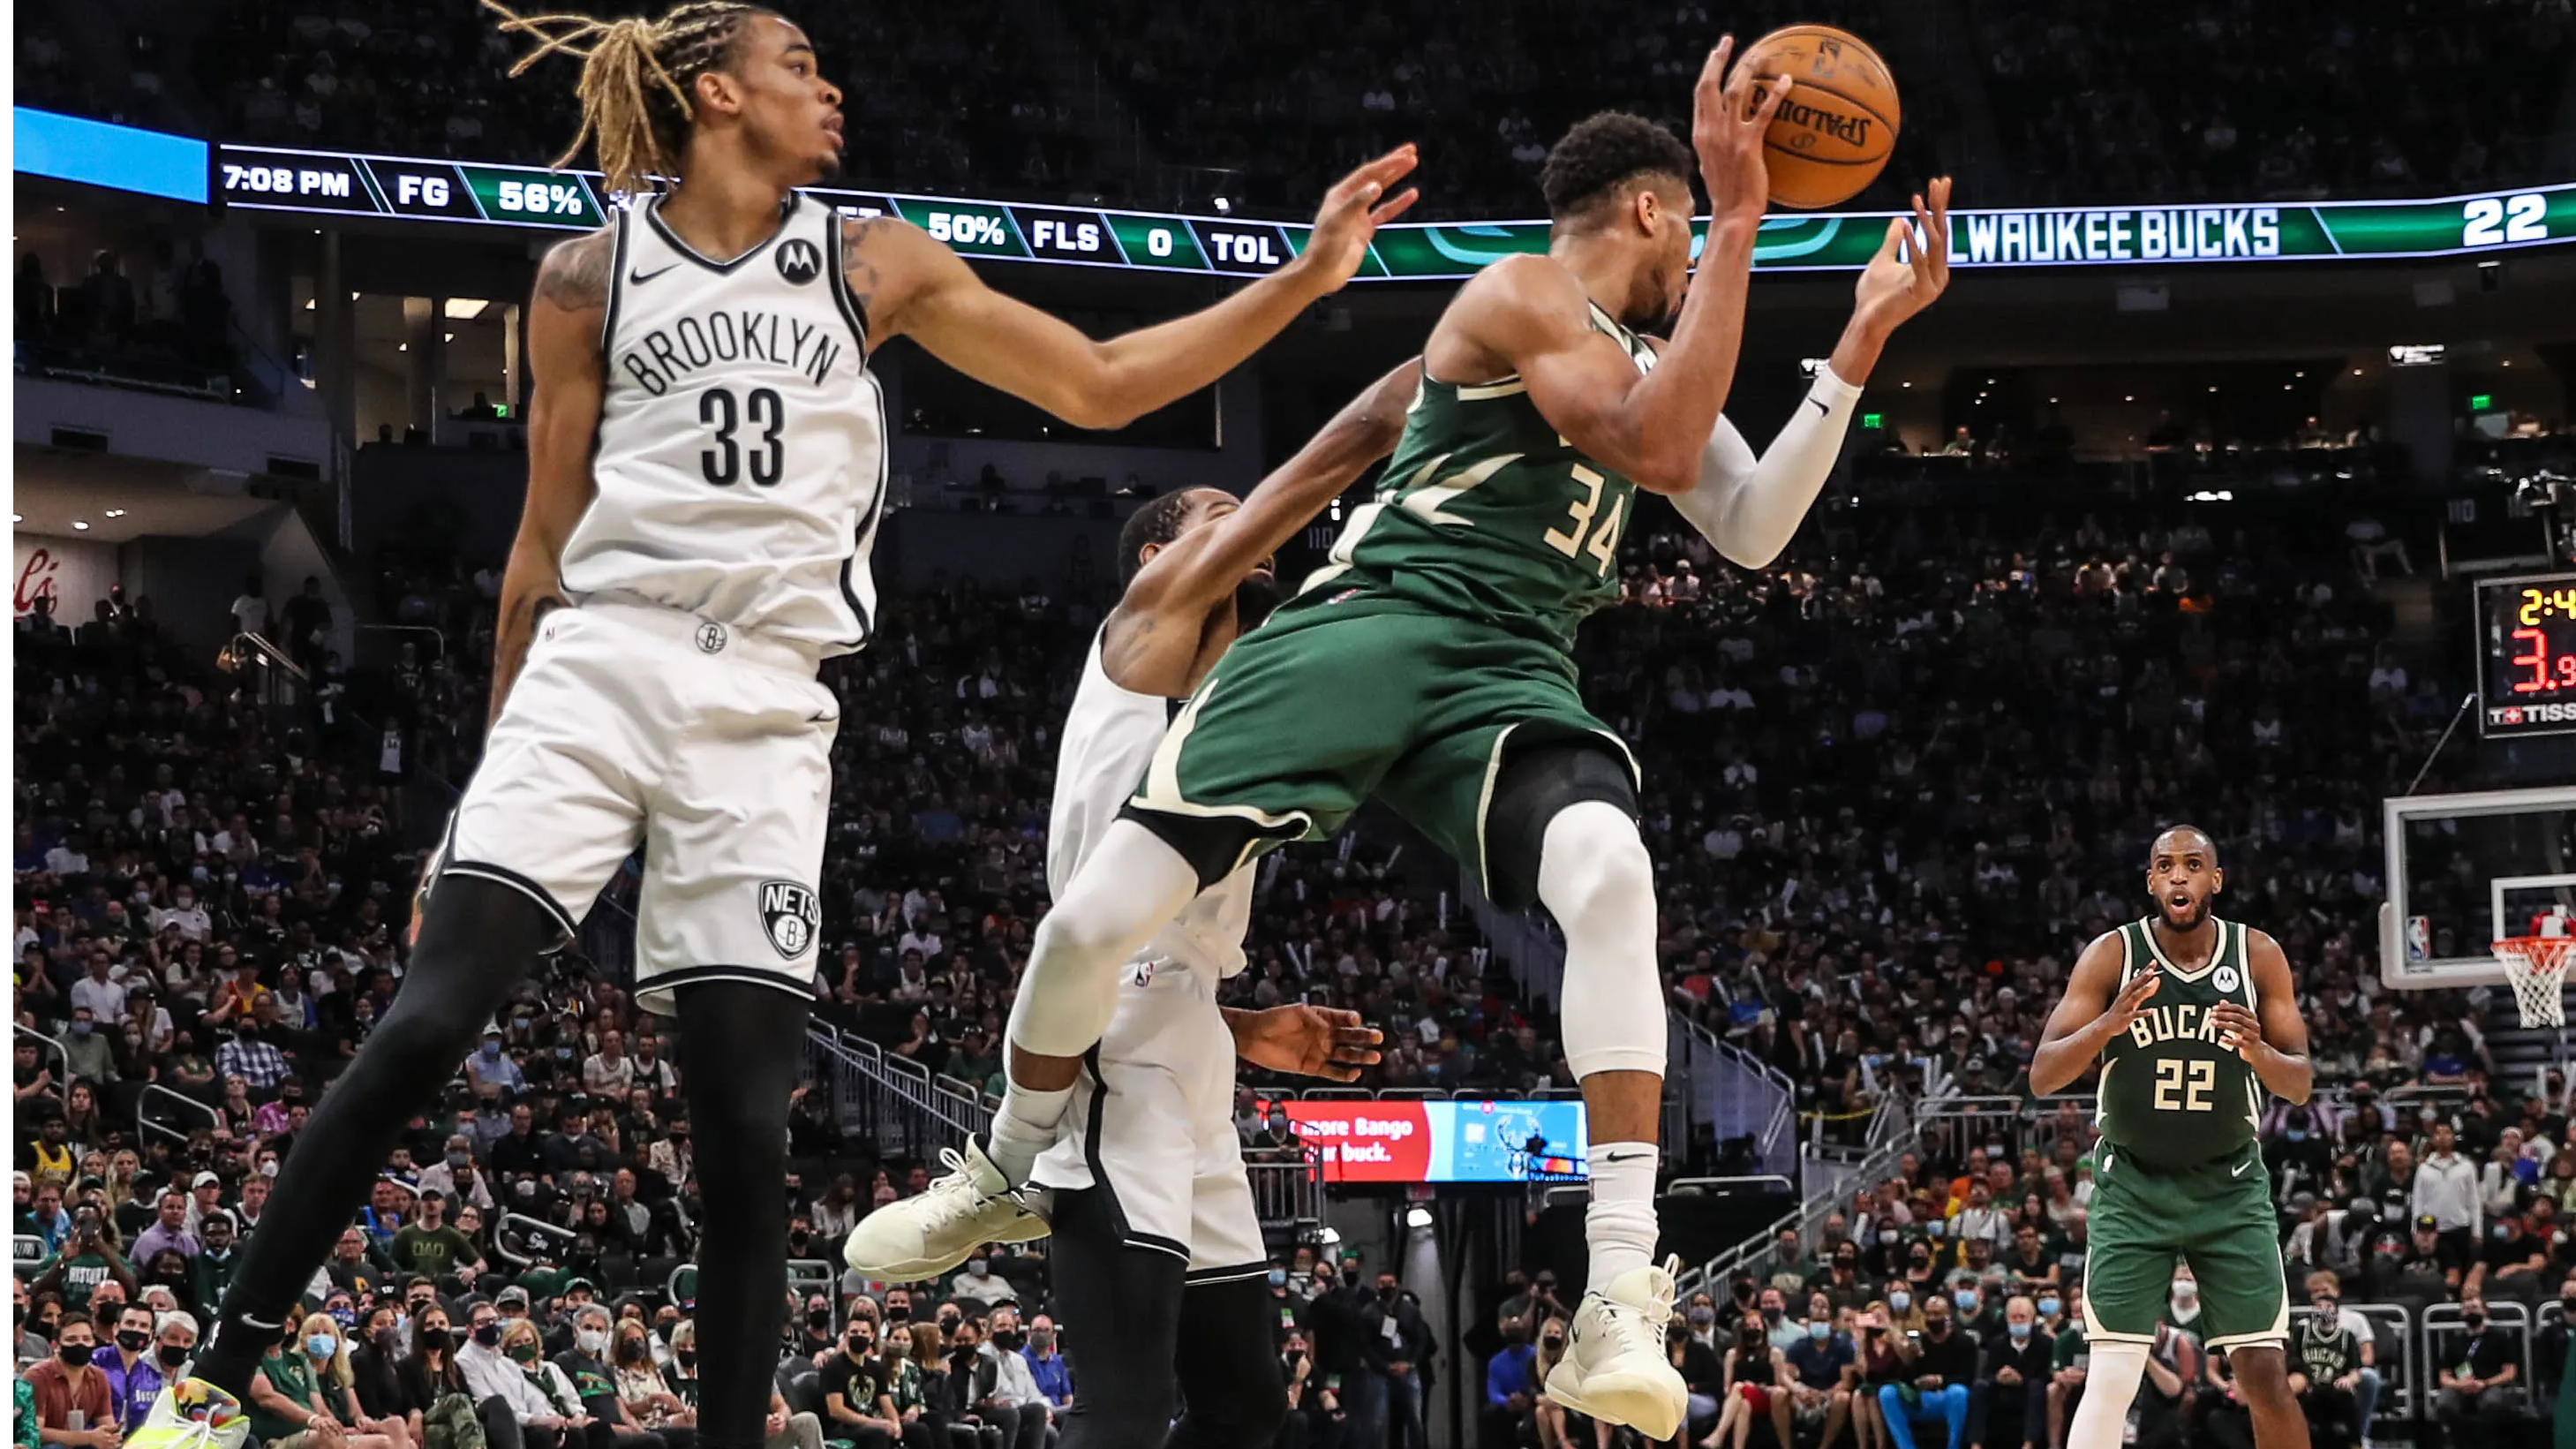 Milwaukee Bucks hold off Brooklyn Nets to claw back in NBA playoff series